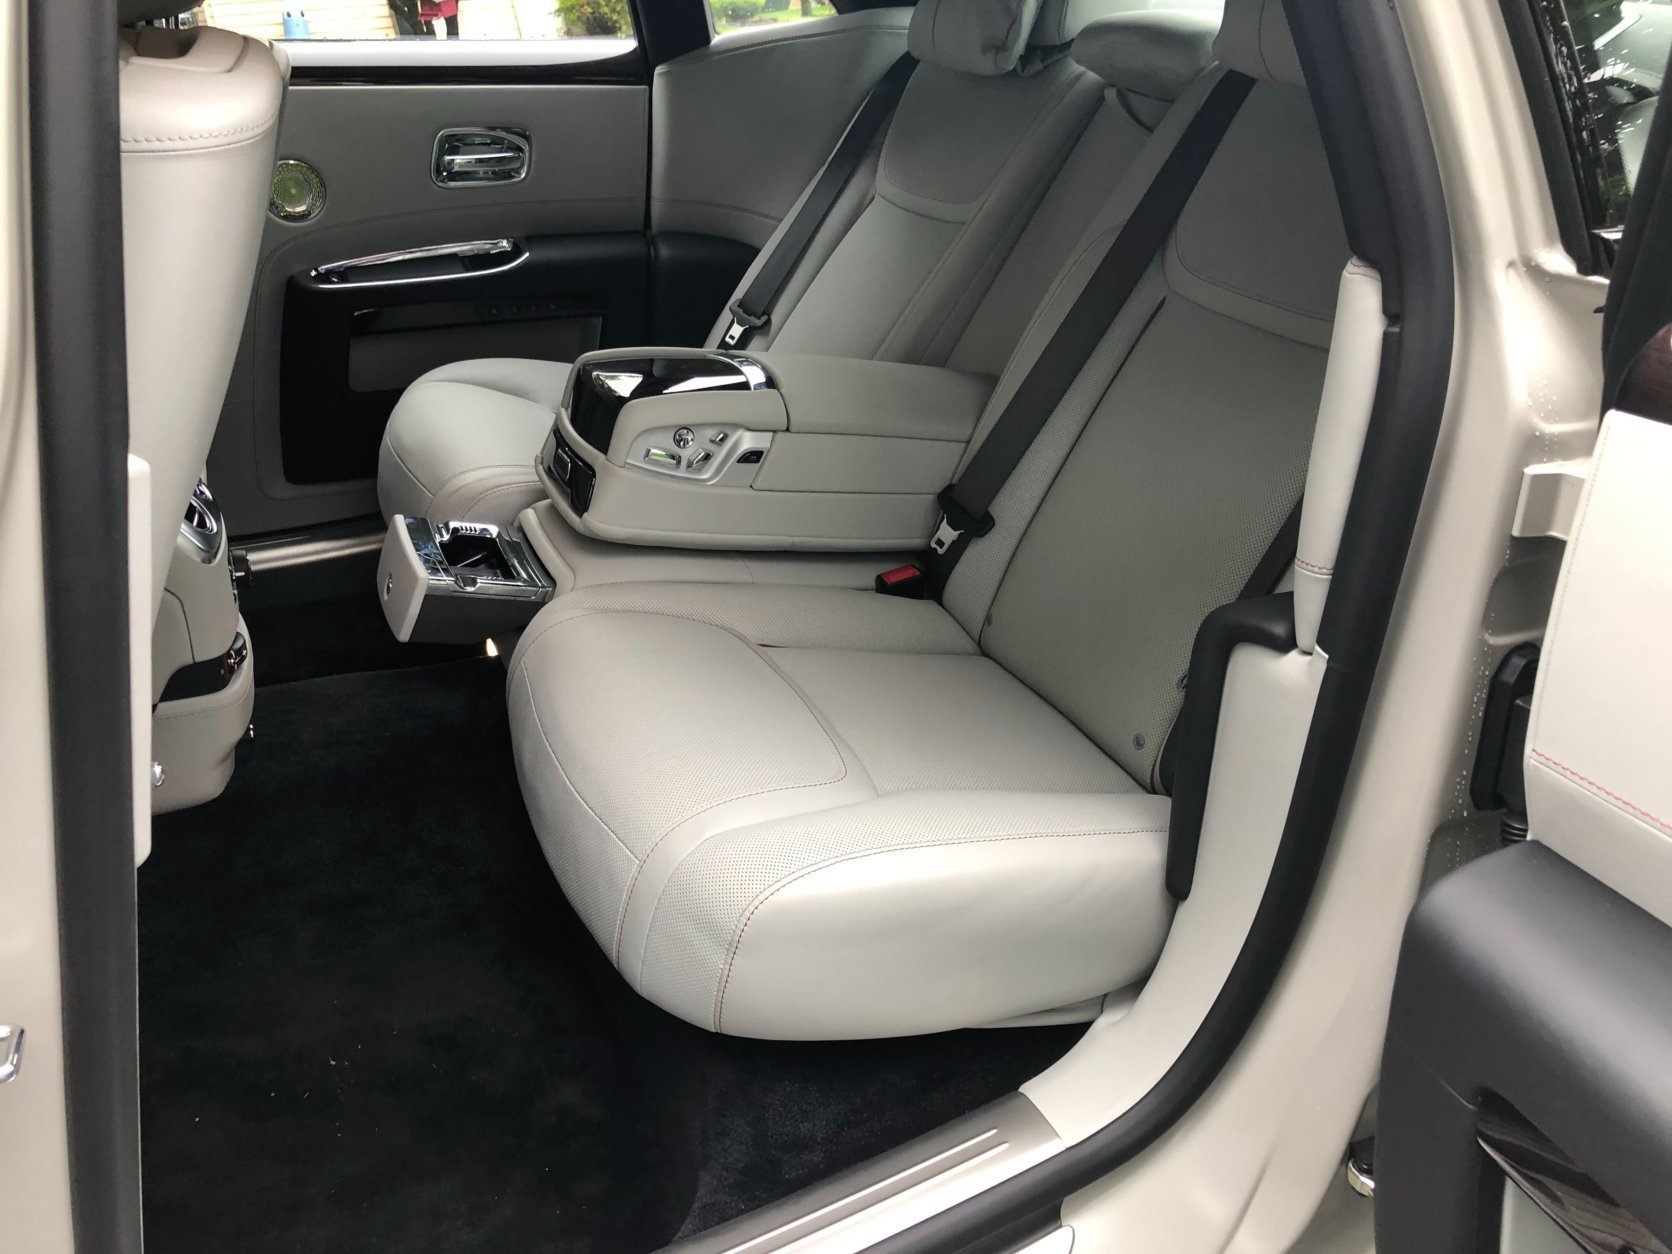 <p>The back seats have the $8,000 individual configuration, so they operate independently and you can sit or lounge in ultimate comfort.</p>
